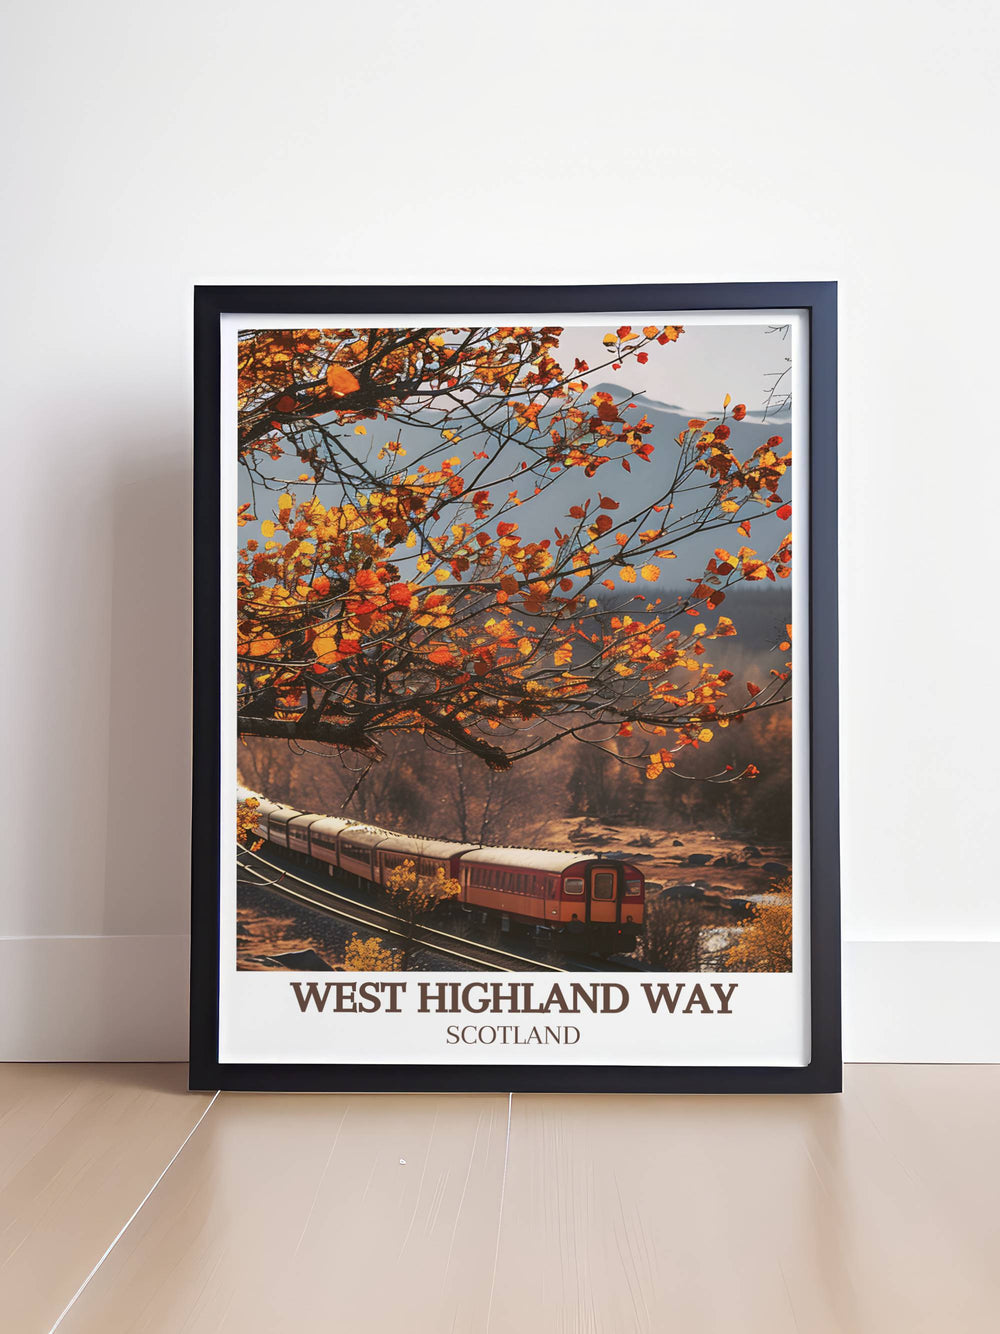 Framed print of the Rannoch Moor, capturing the haunting beauty and vast wilderness of this iconic Scottish landscape along the Western Highland Way.